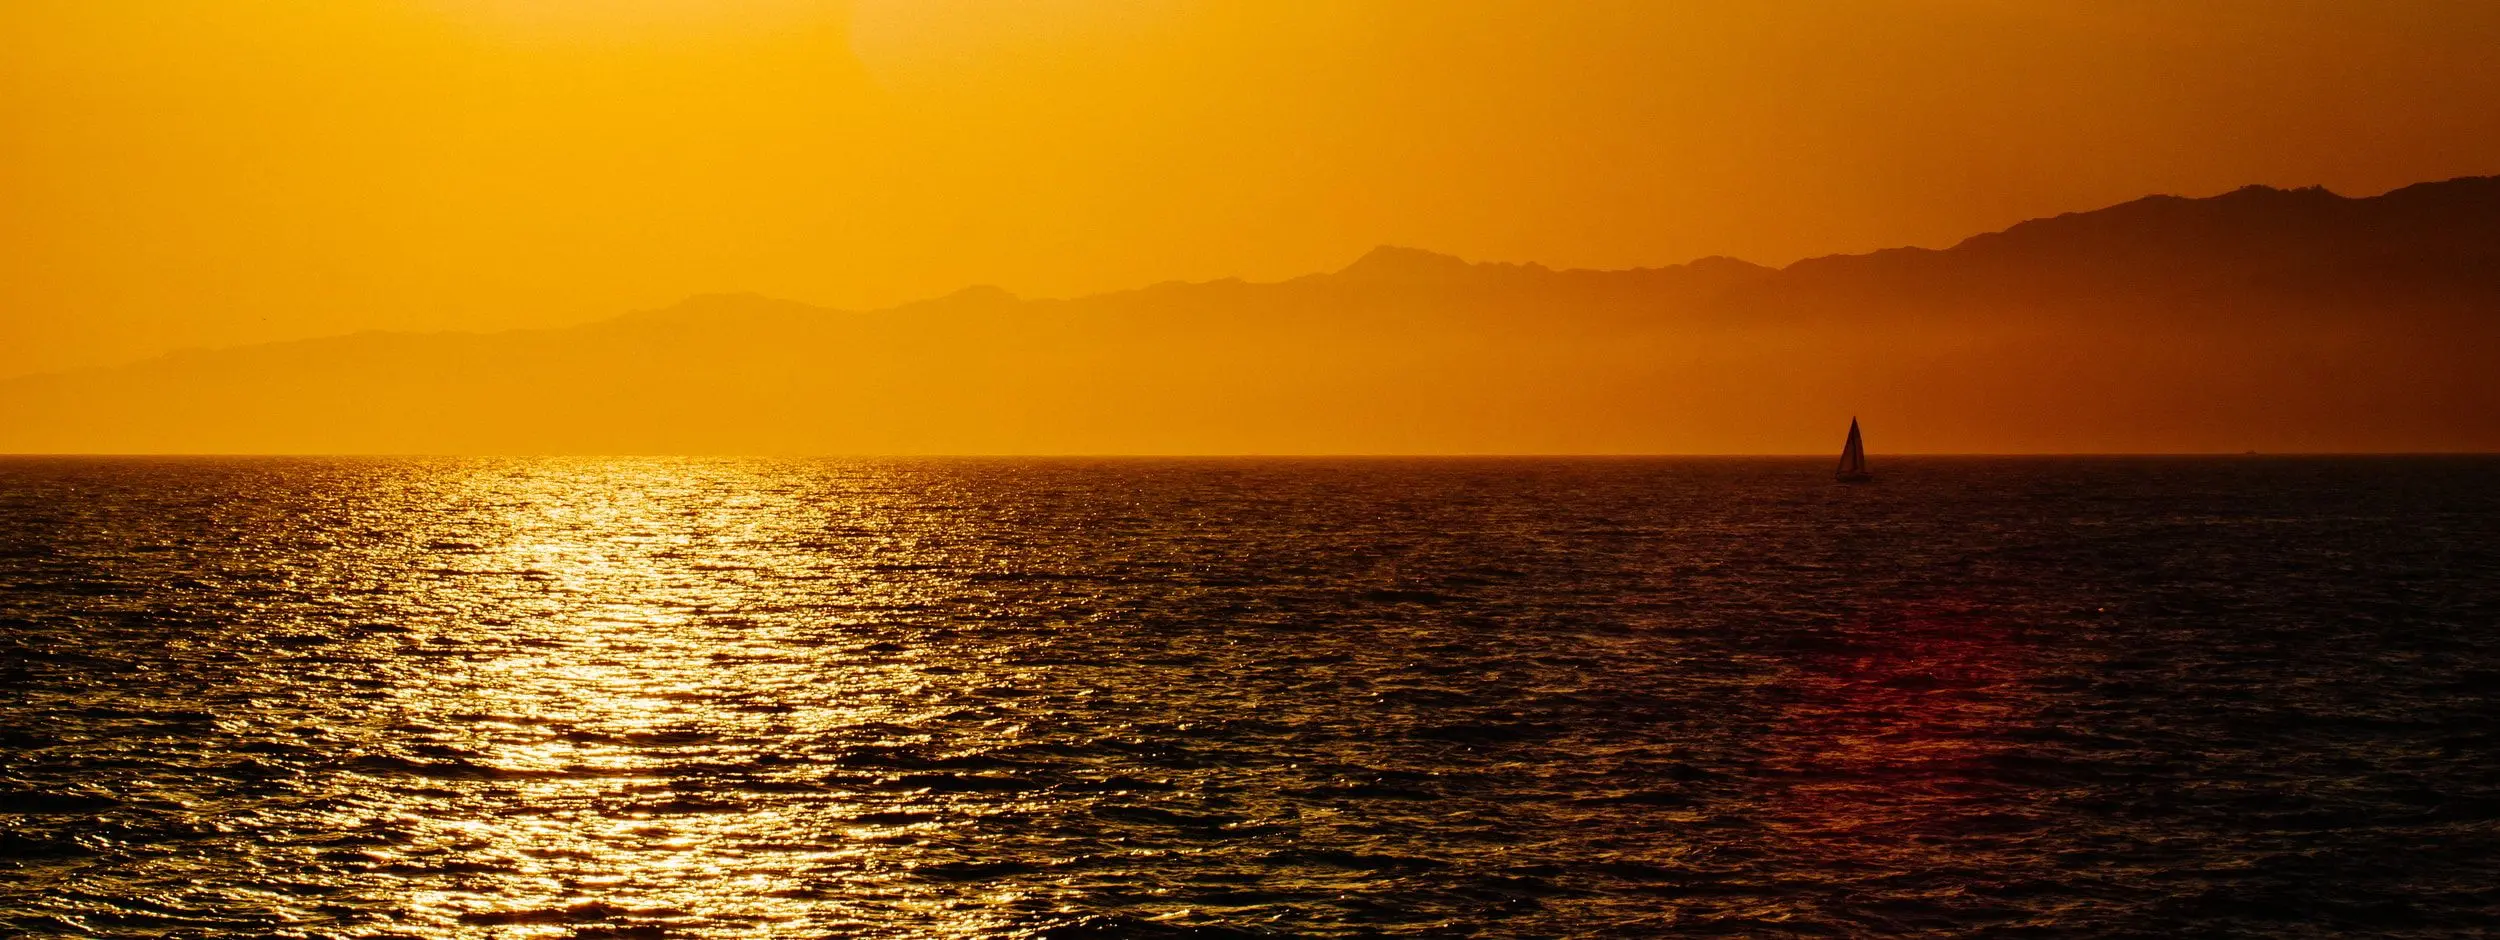 A sailboat near the horizon on the black ocean water, silhouetted against mountains. Golden hour.